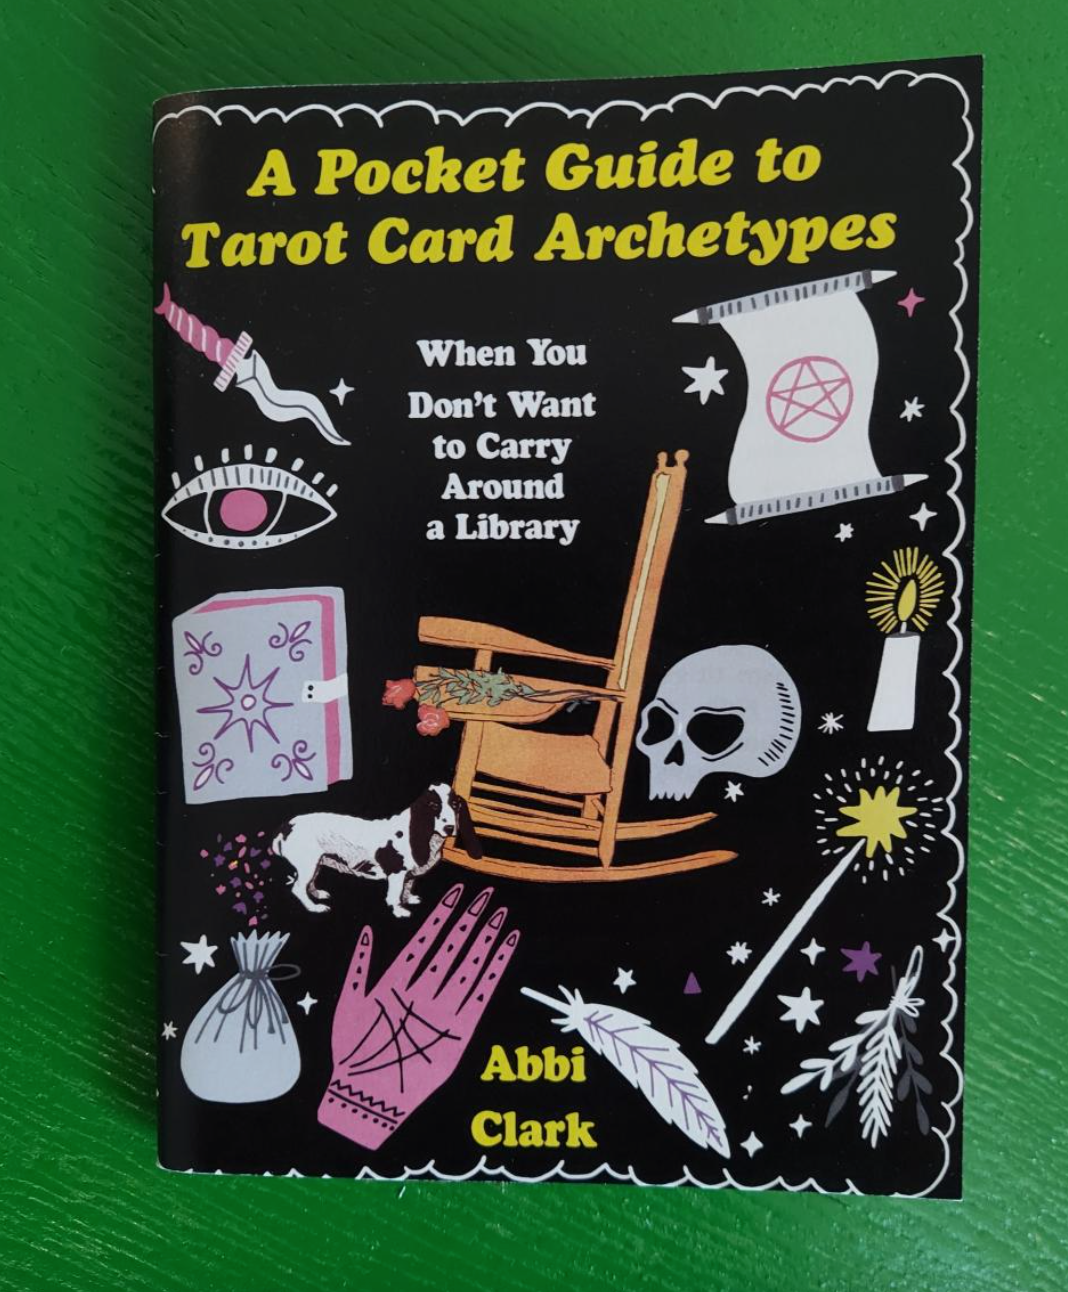 Pocket Guide to Tarot Card Archetypes